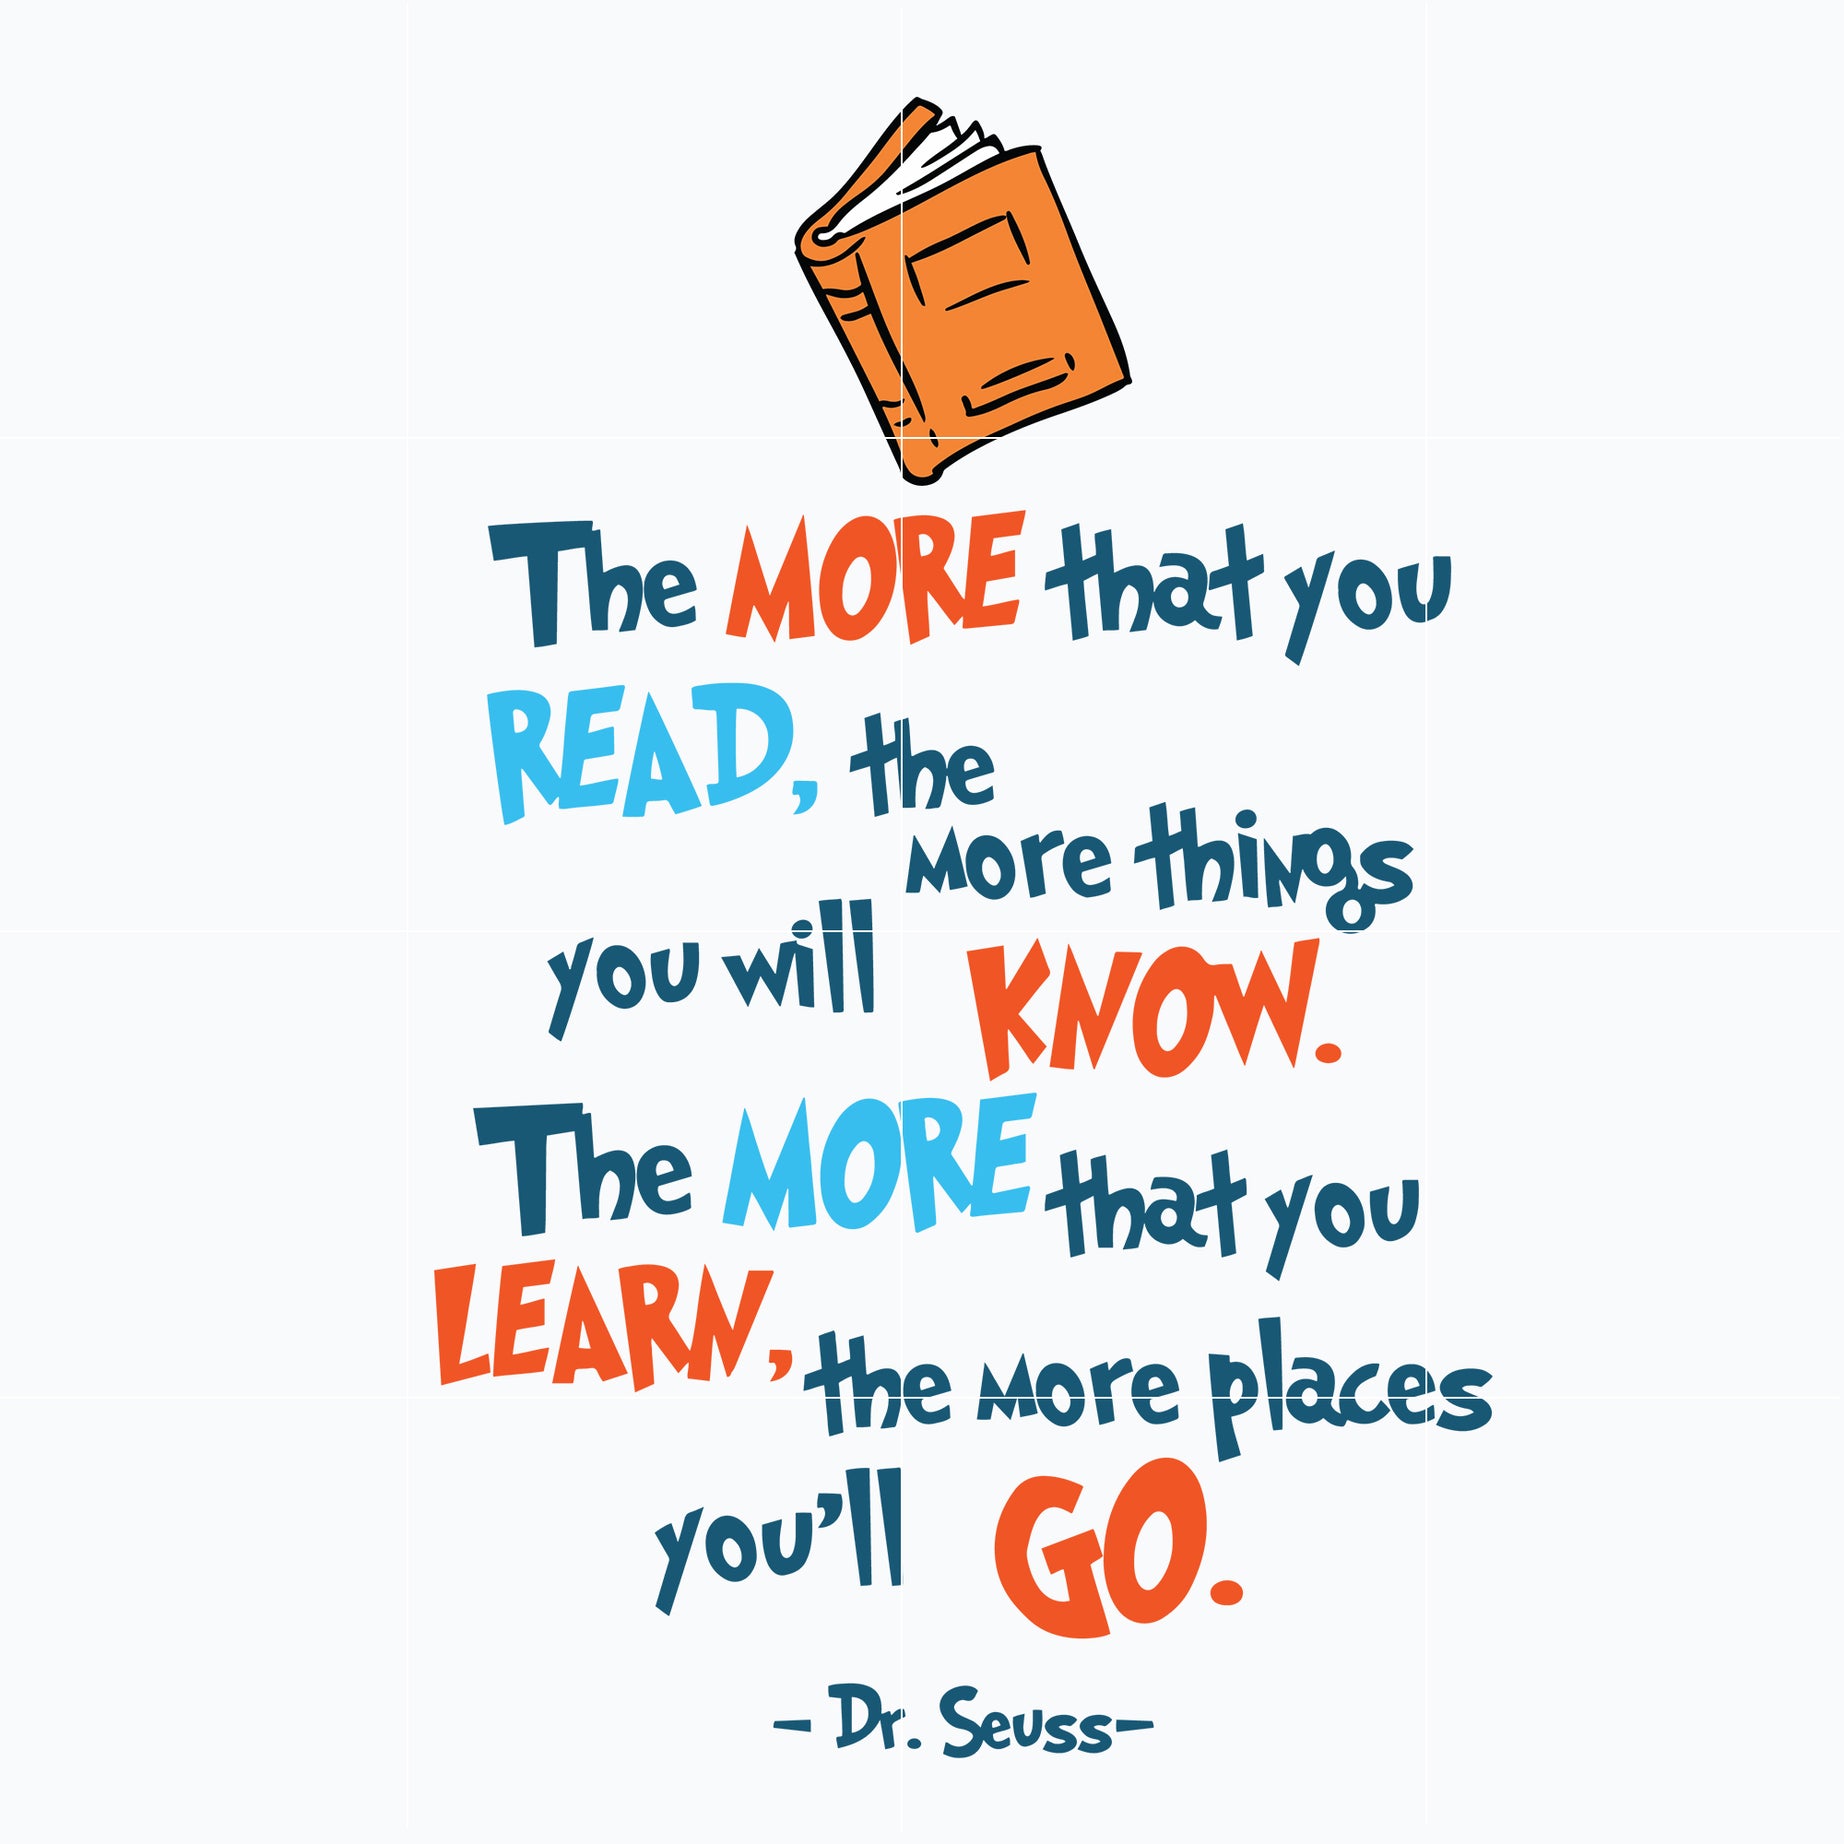 The more that you read, the more things you will know, the more that you learn, the more places you'll go svg, dr seuss svg, png, dxf, eps digital file DR0601213